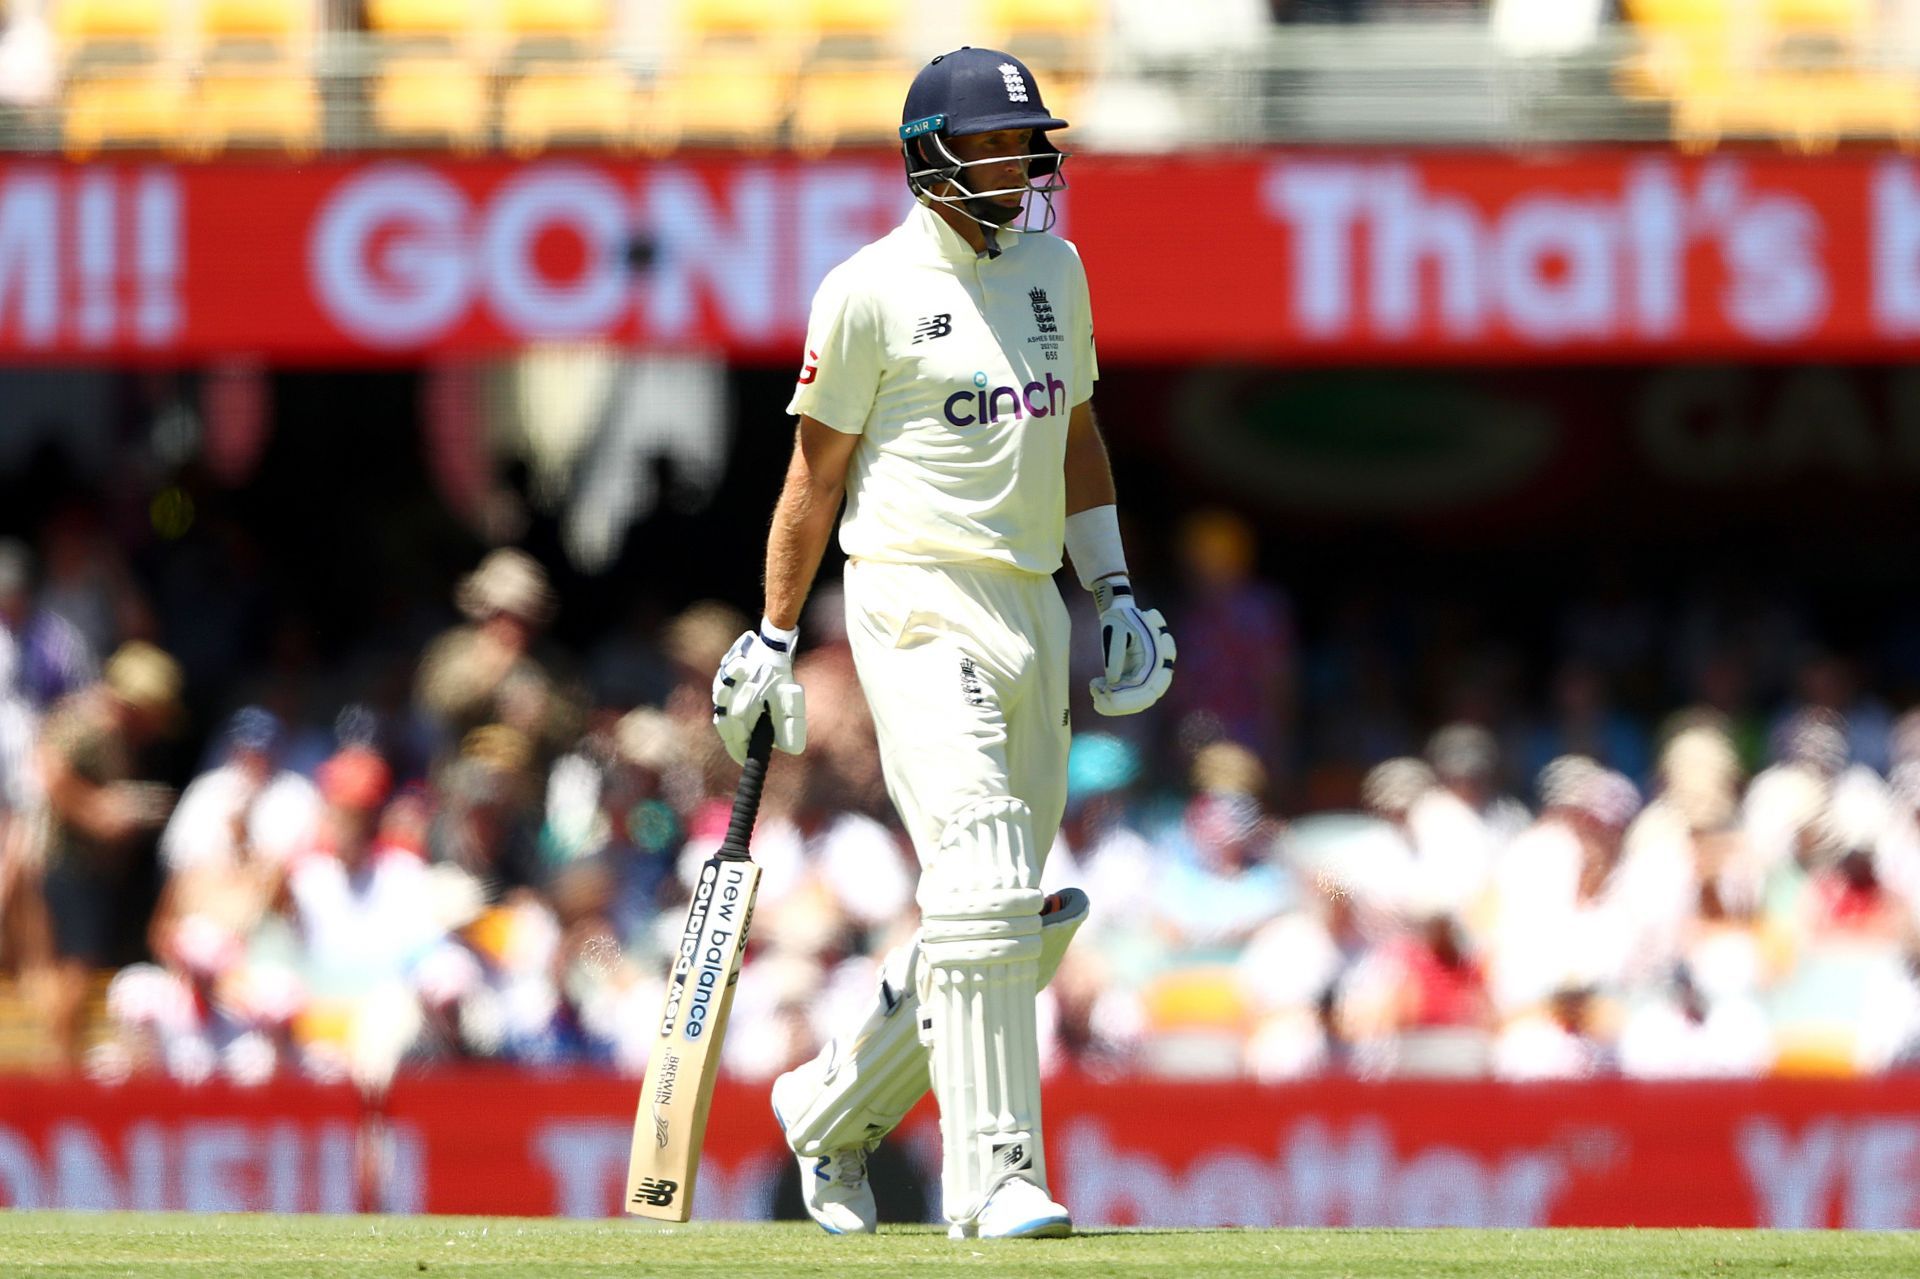  Joe Root made 89 in the second innings